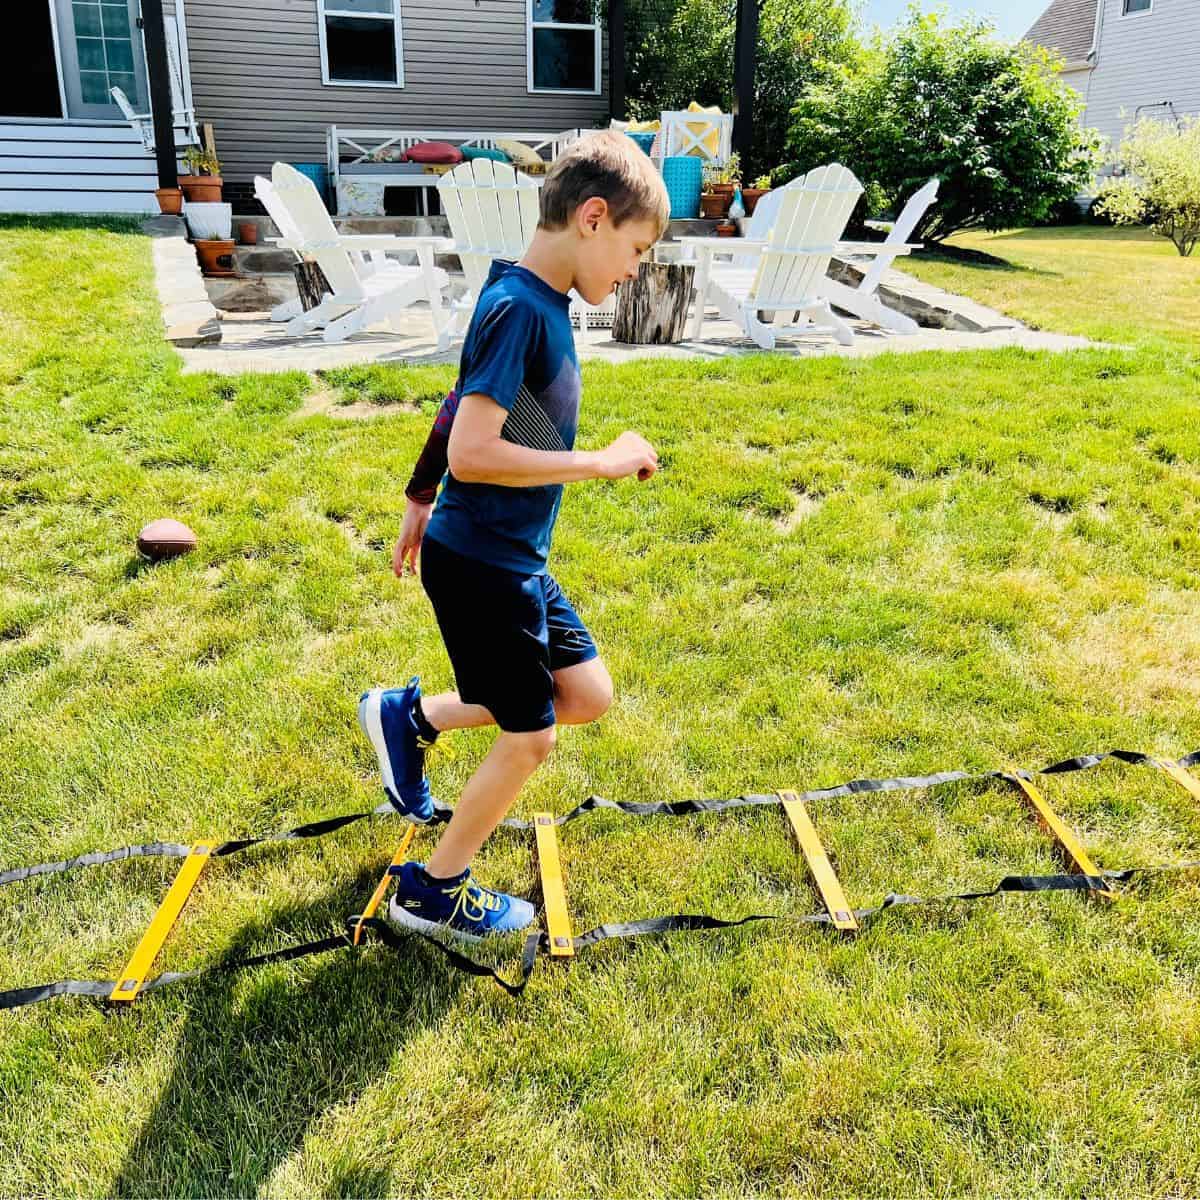 Obstacle course ideas for all ages, indoors or outdoors with little to no prep. Plus learn obstacle course benefits and get a list of activities to make your own! 